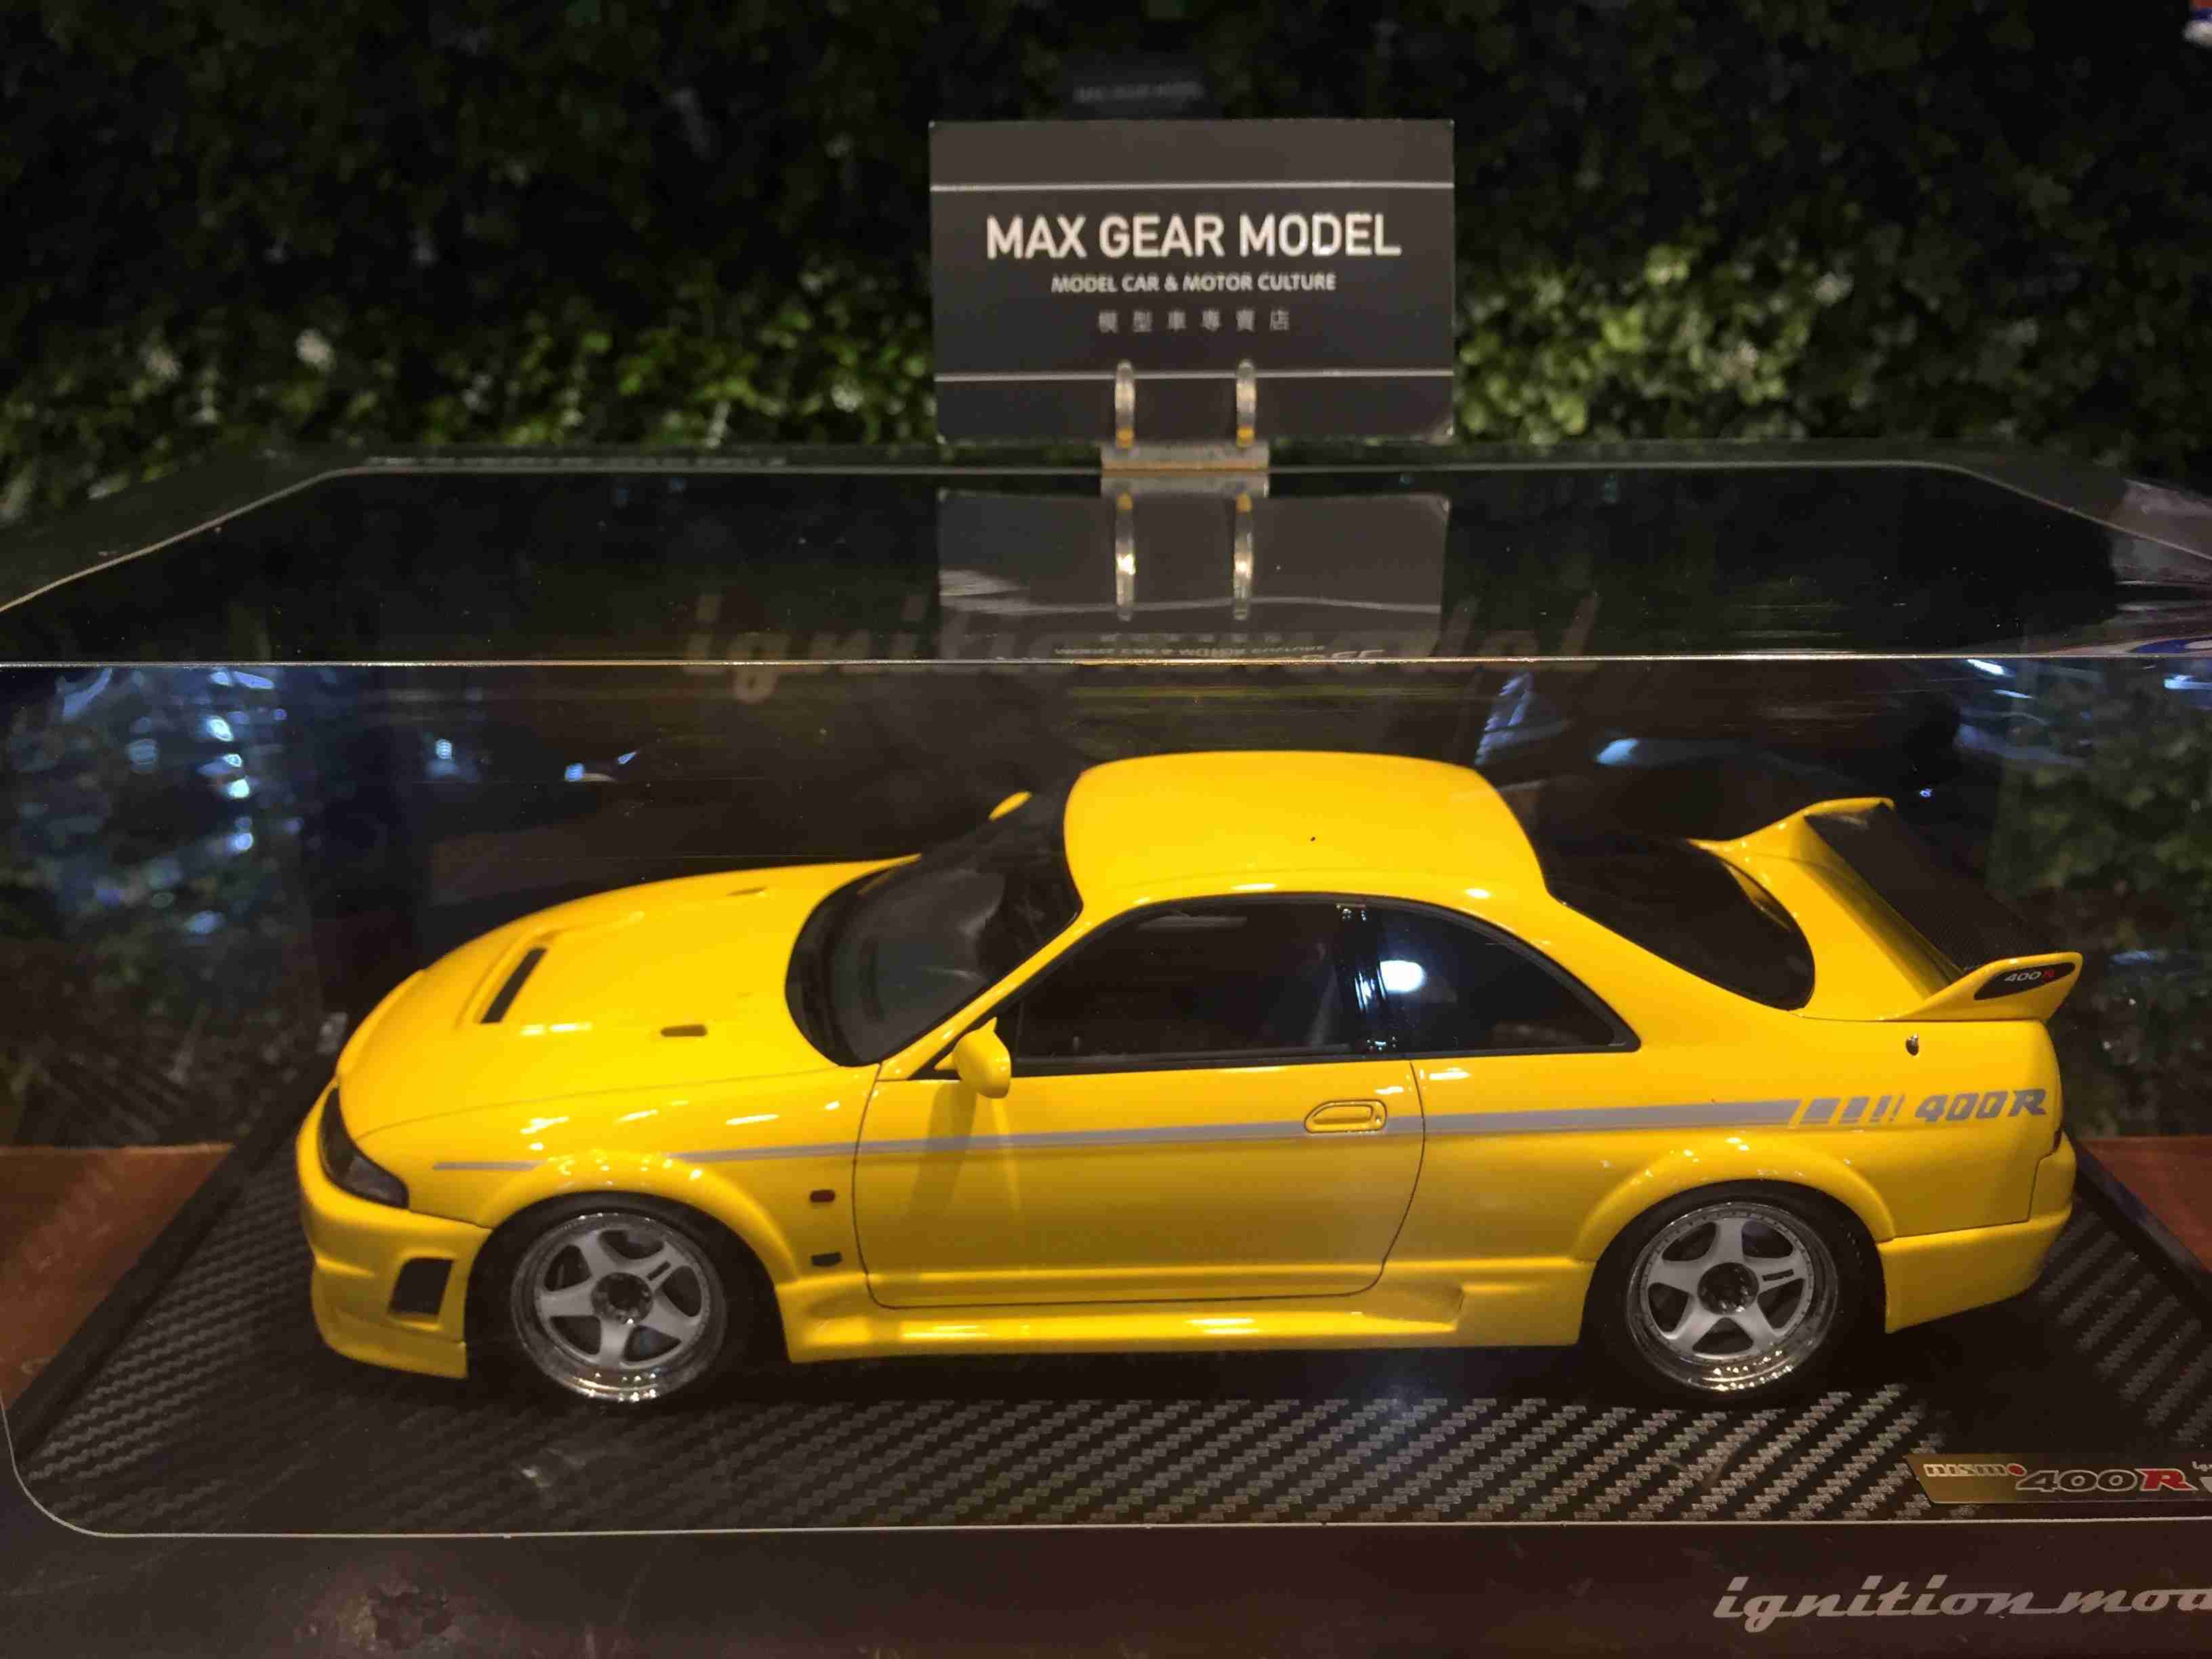 1/18 Ignition Model Nismo R33 GT-R 400R Yellow IG2252【MGM】